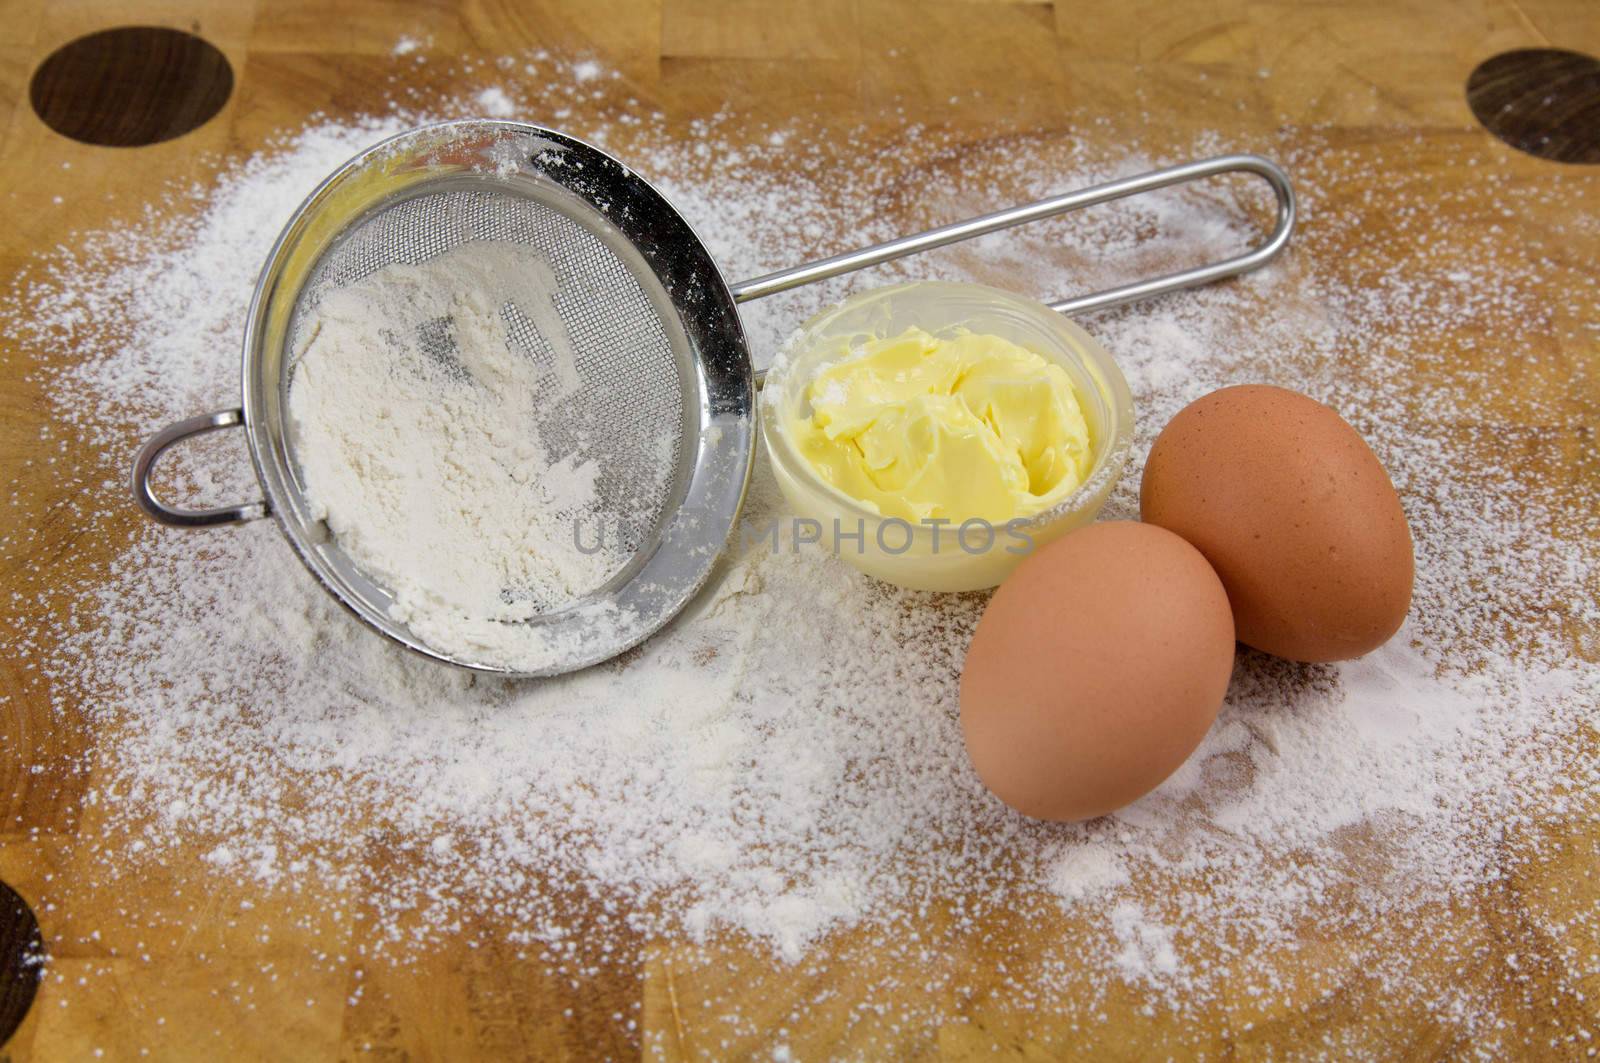 Things Used for Baking in the Kitchen Home Related Eggs Butter and Flour